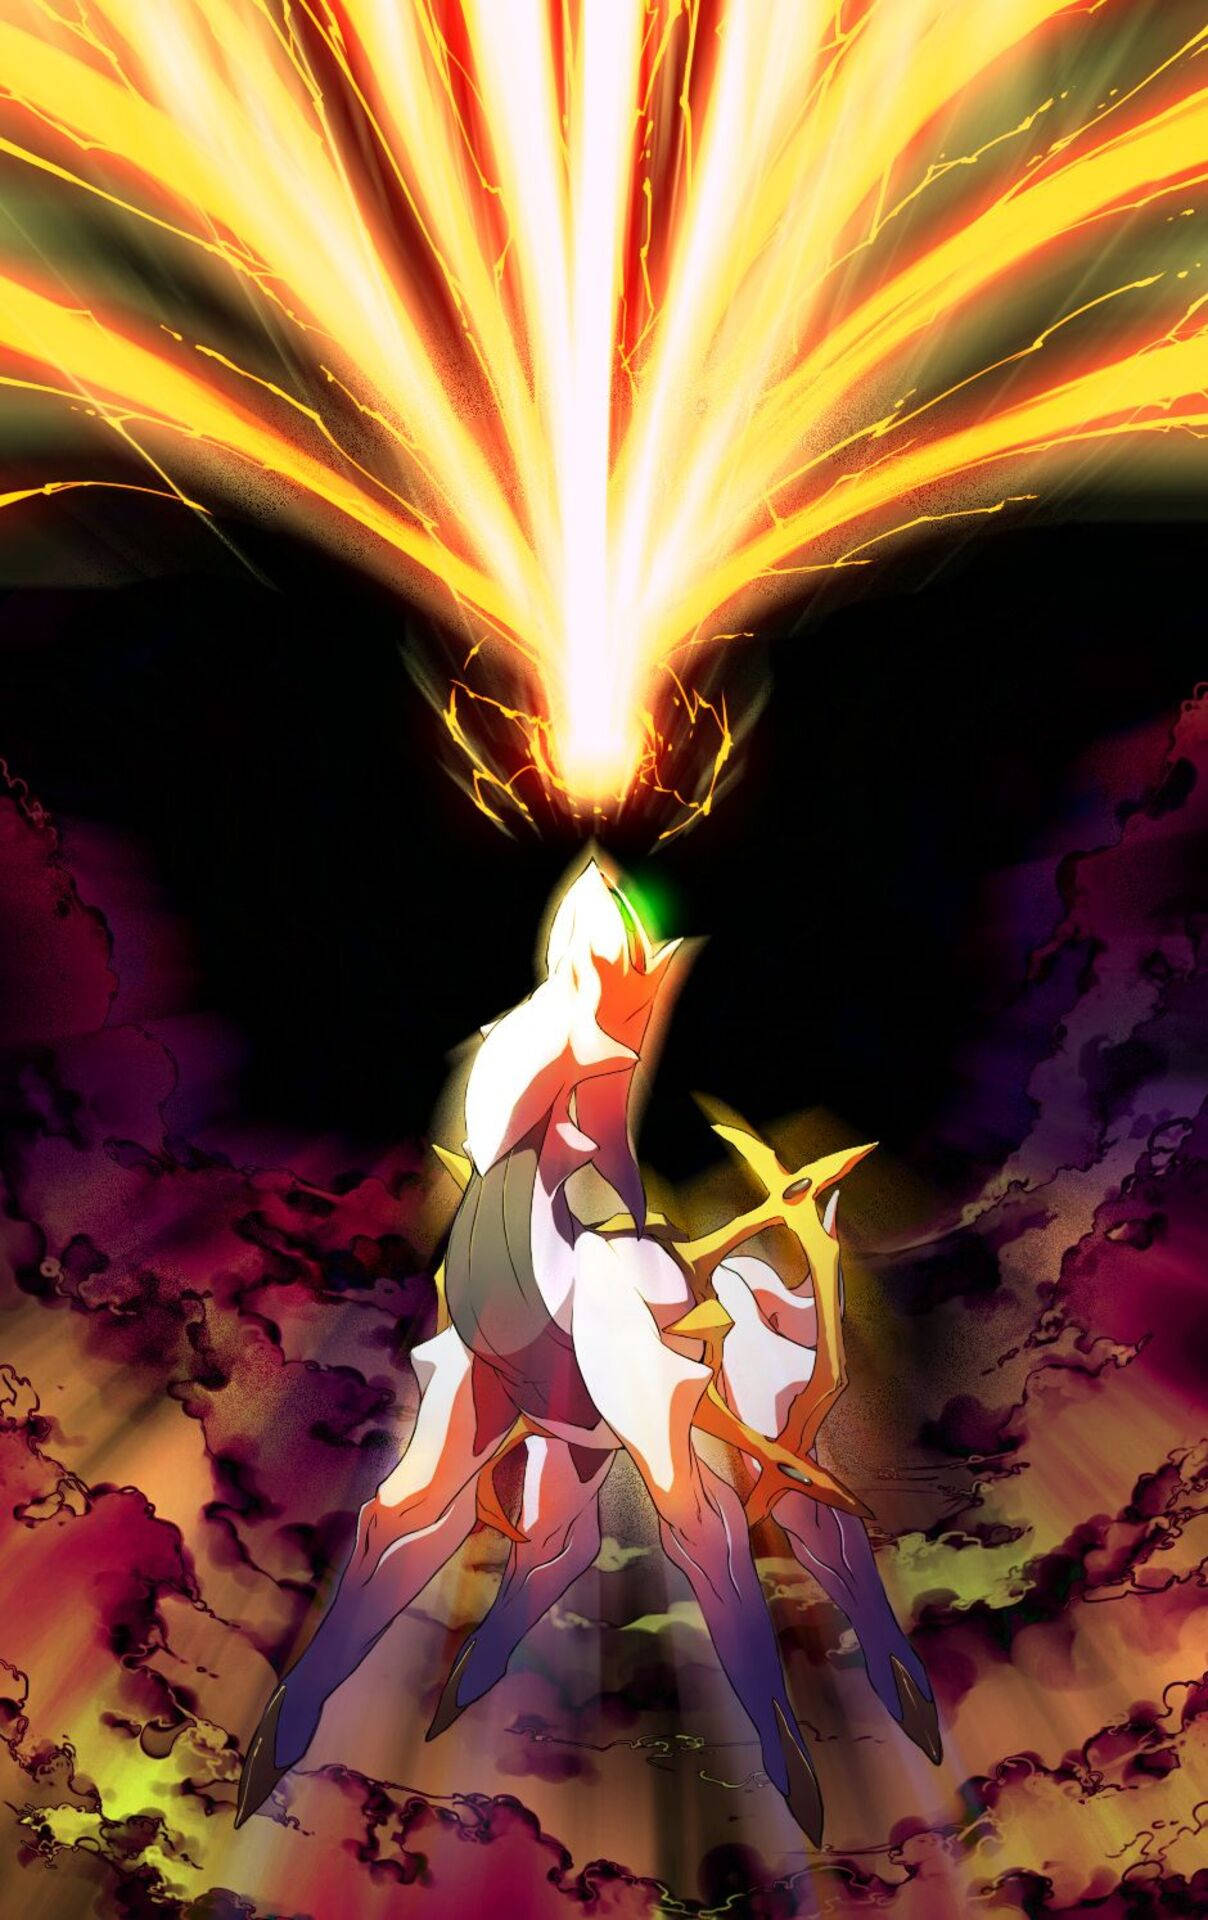 Unleash The Power Of Arceus And Its Fire-type Explosion Background